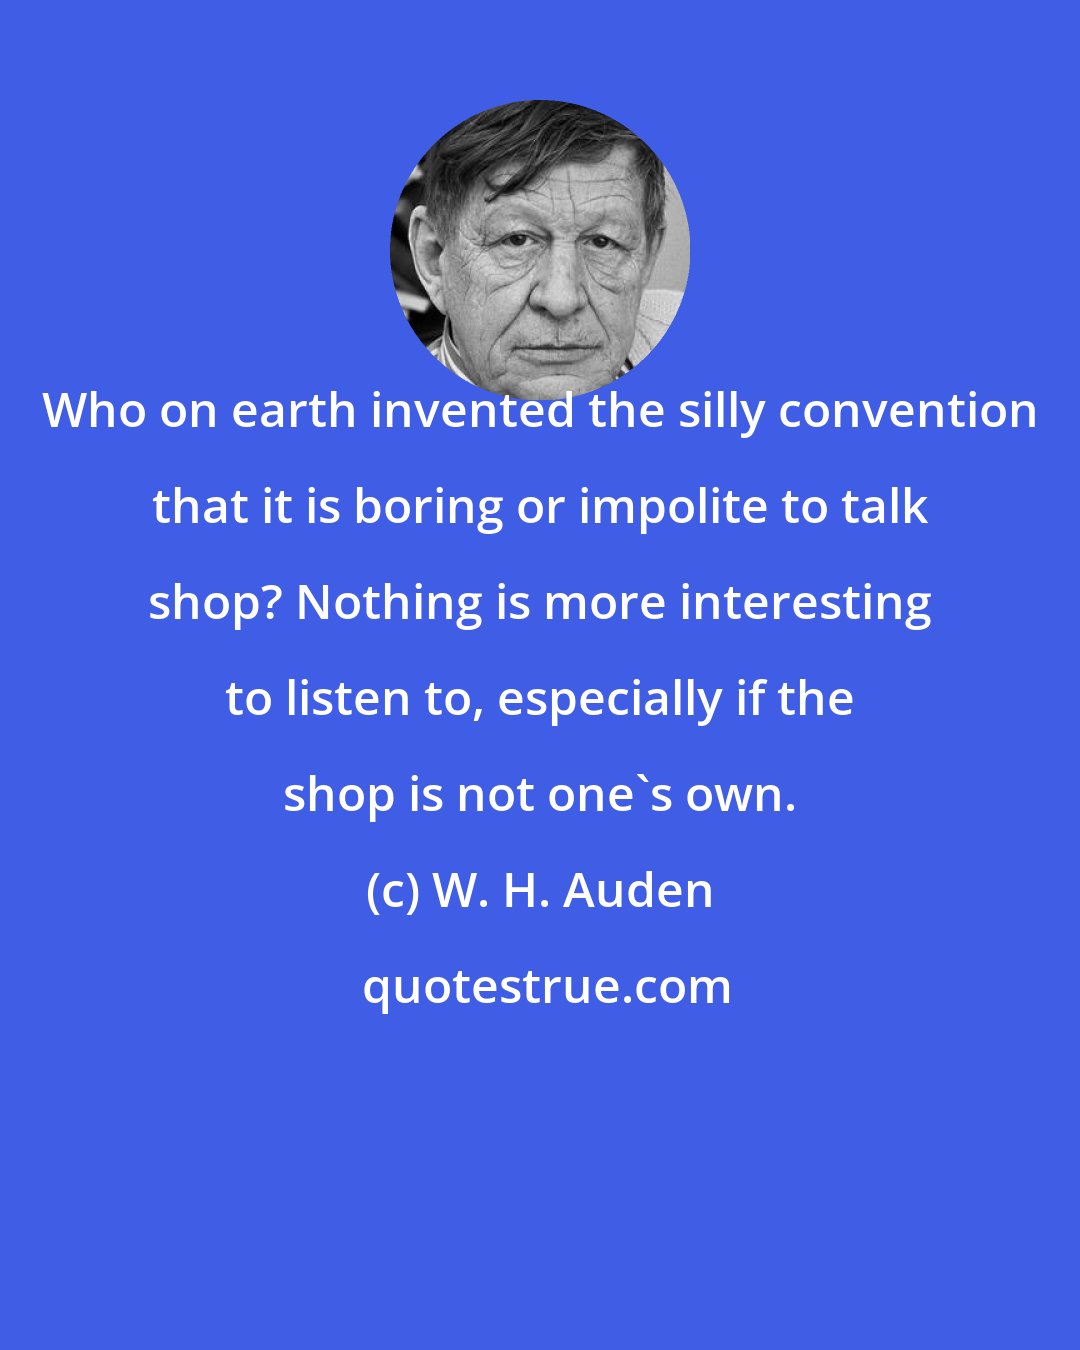 W. H. Auden: Who on earth invented the silly convention that it is boring or impolite to talk shop? Nothing is more interesting to listen to, especially if the shop is not one's own.